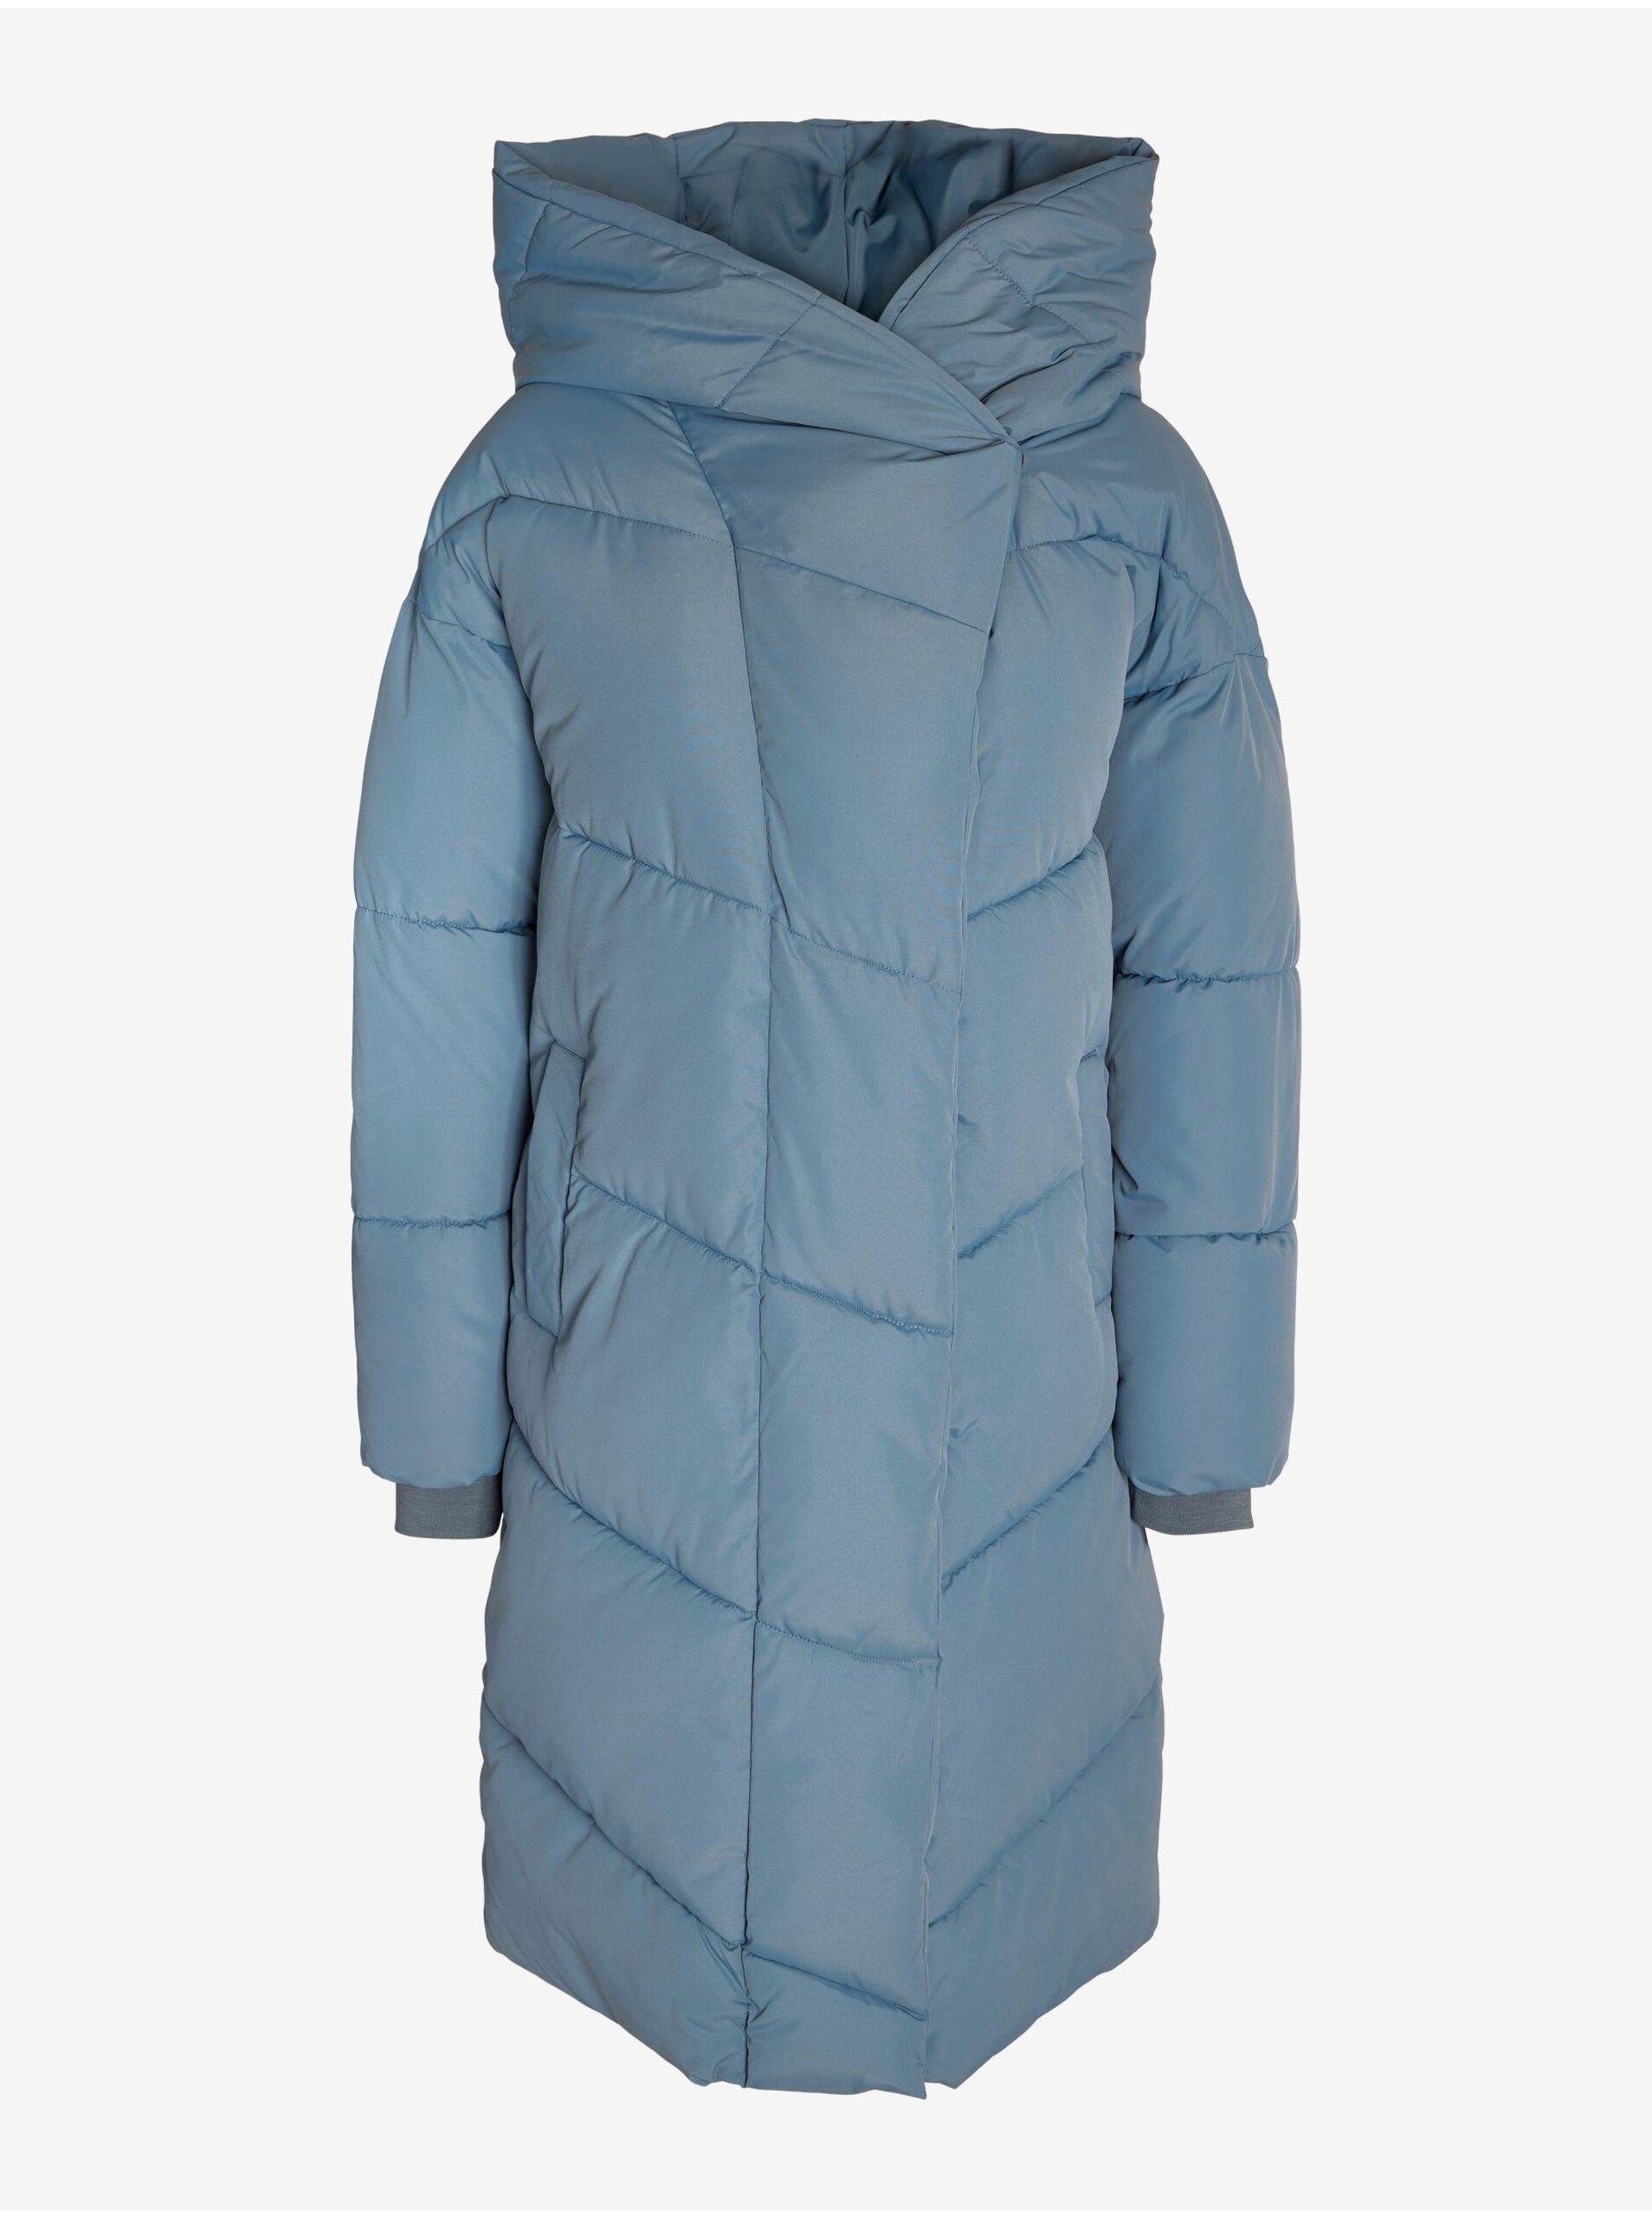 Women's Grey-Blue Quilted Coat Noisy May New Tally - Women